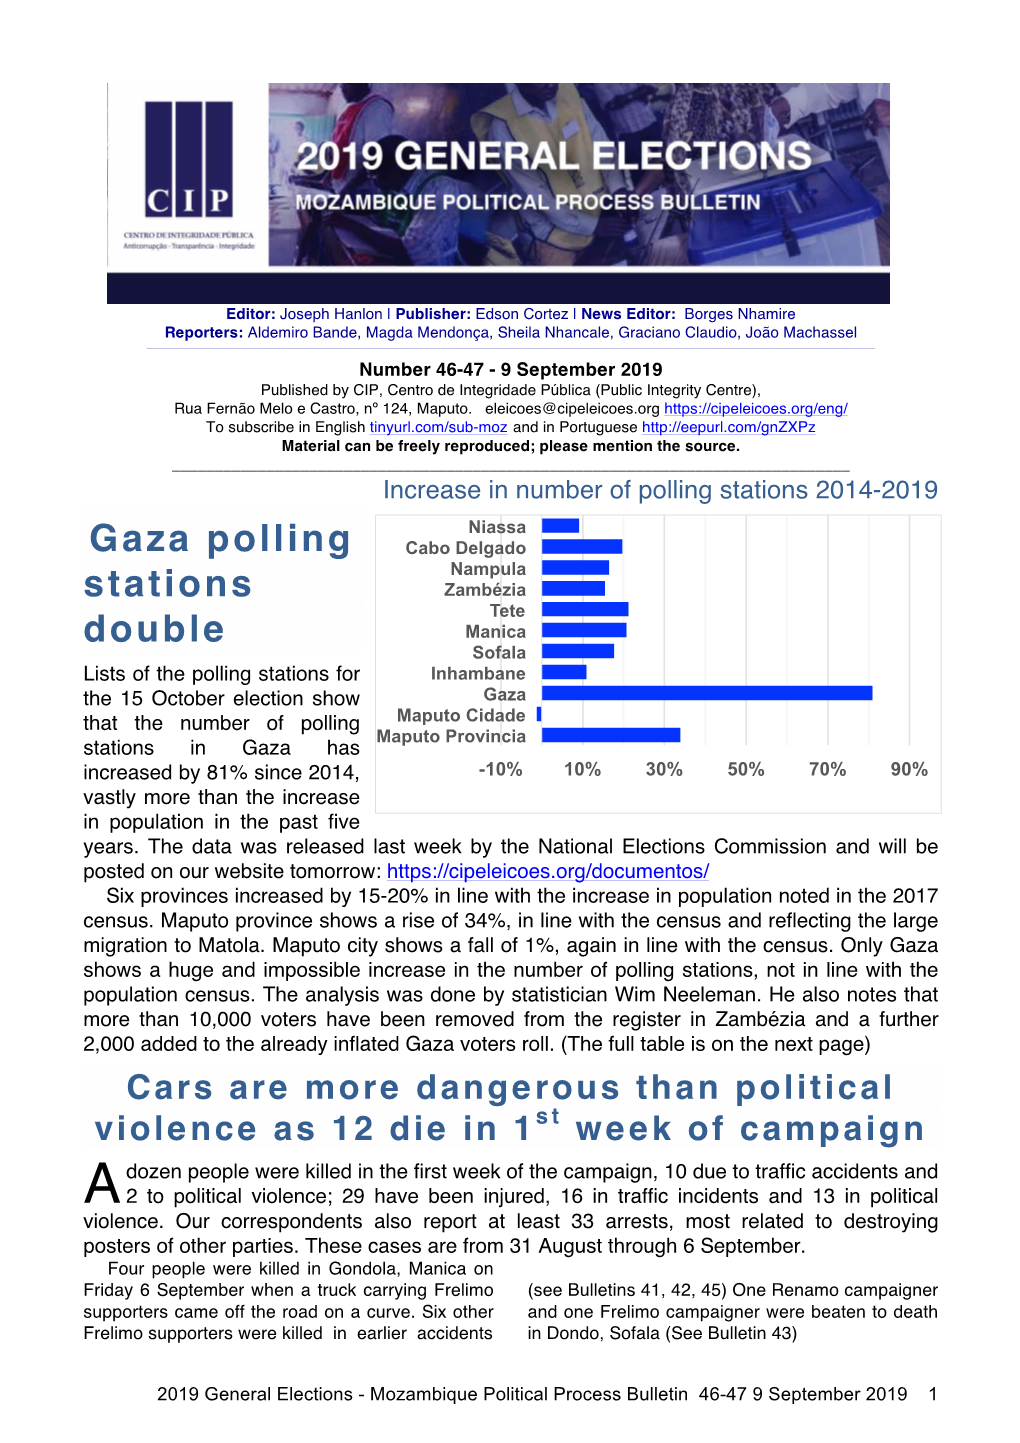 Gaza Polling Stations Double